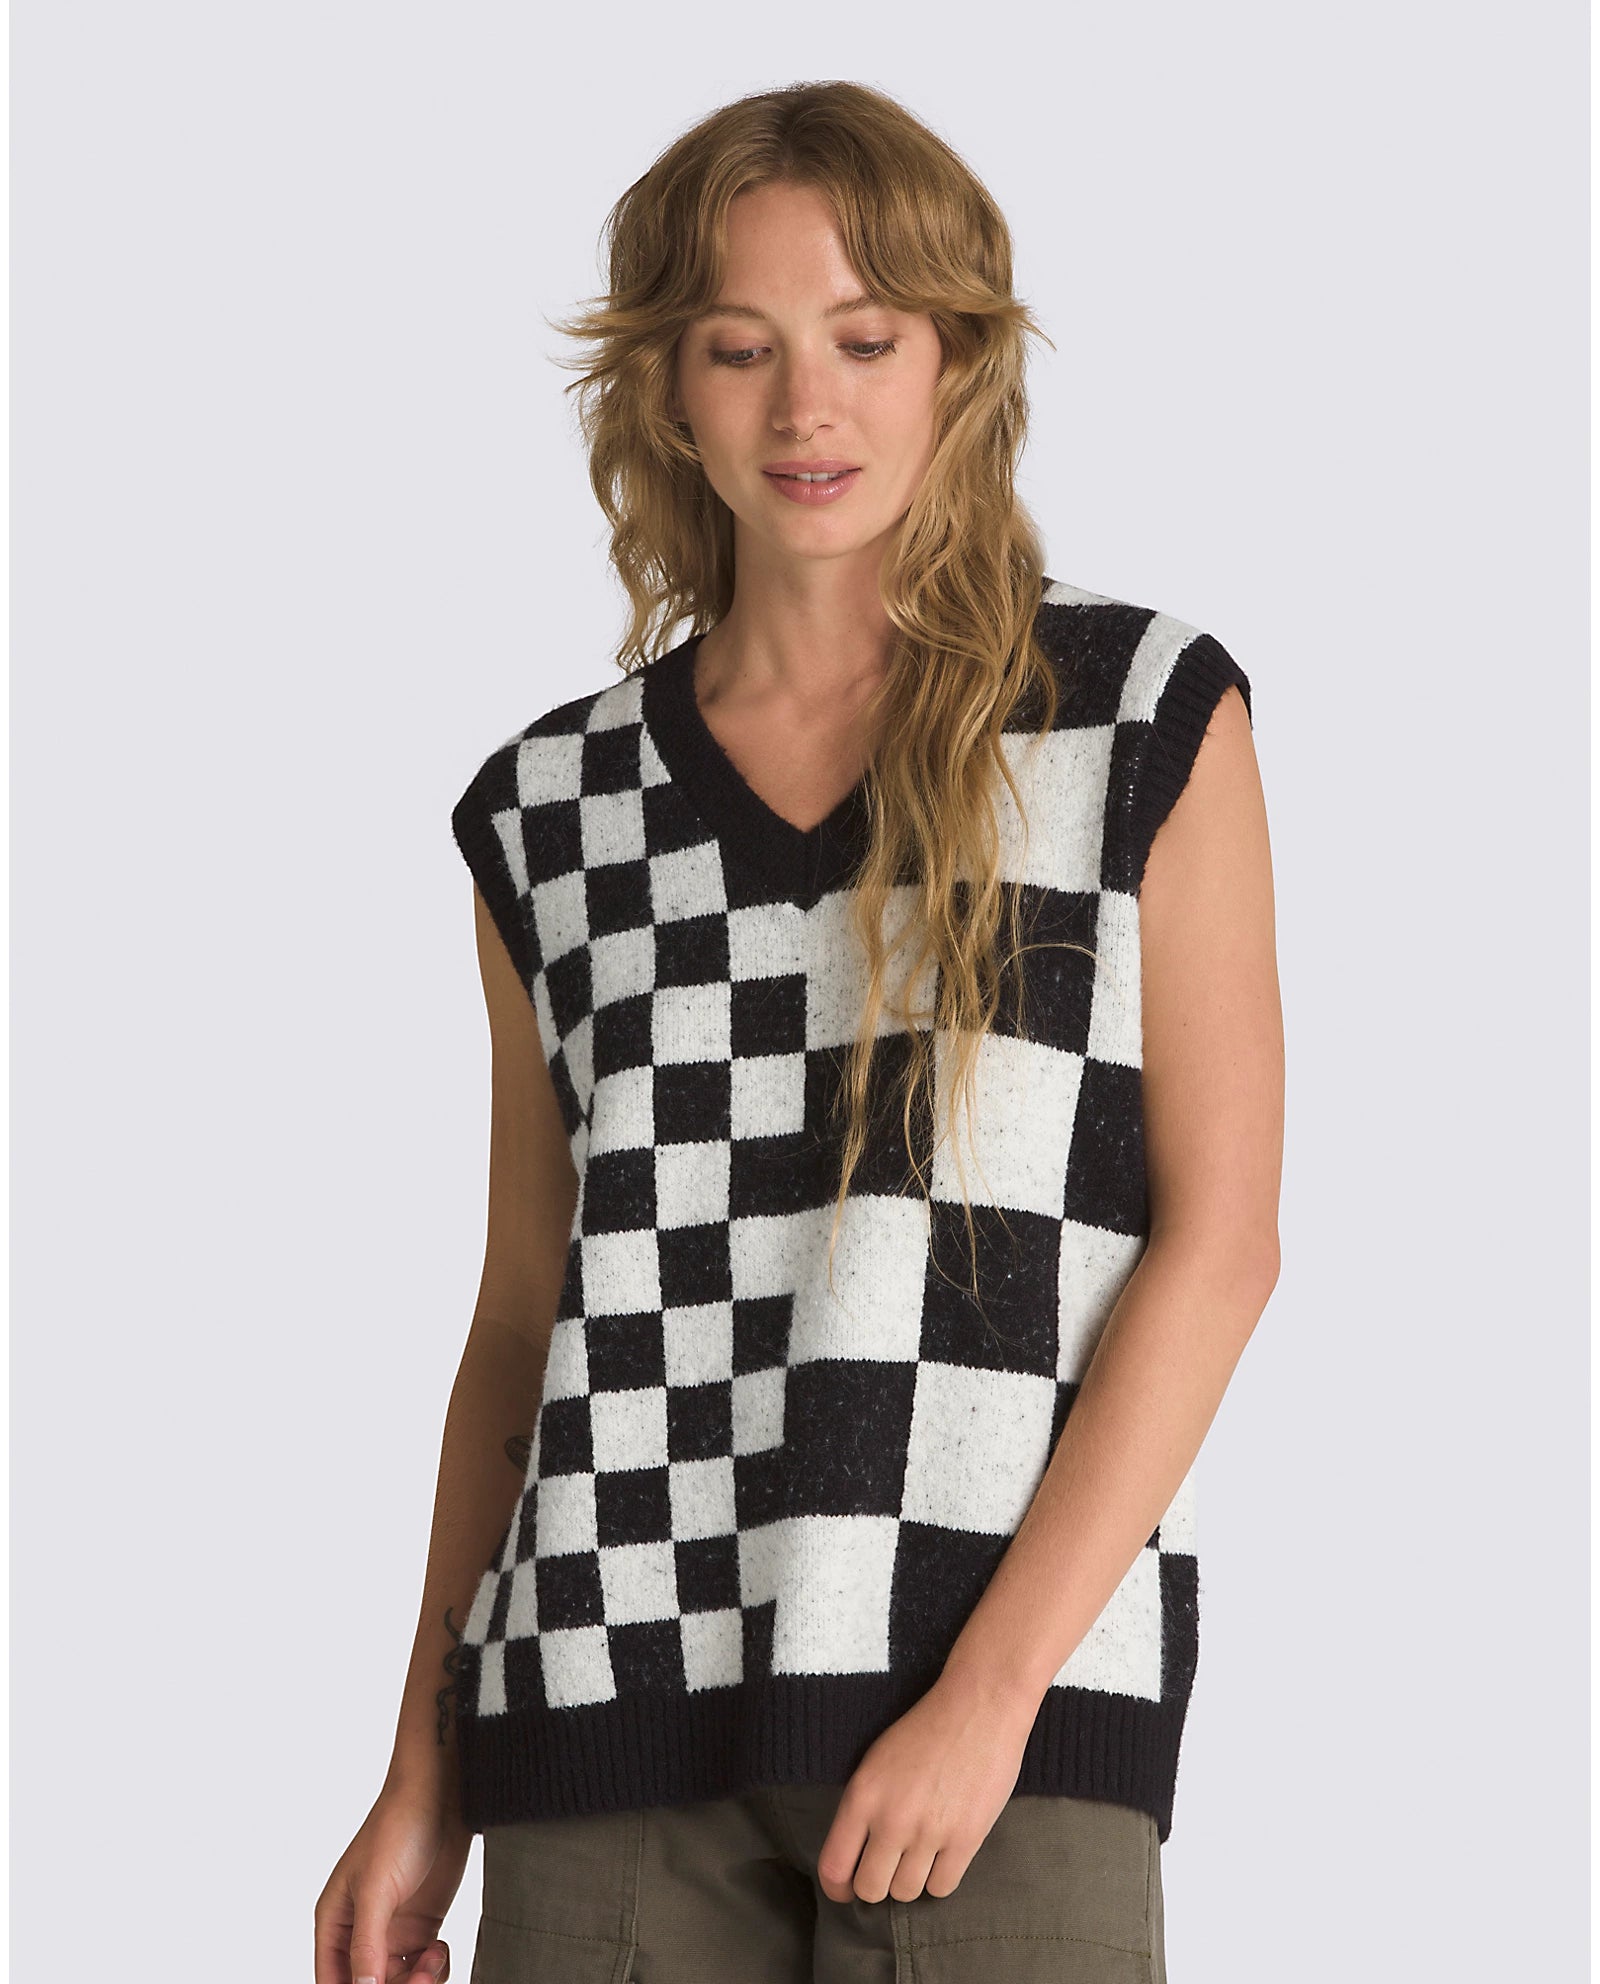 Vans Courtyard Sweater Vest - Black and White Layering Sweater